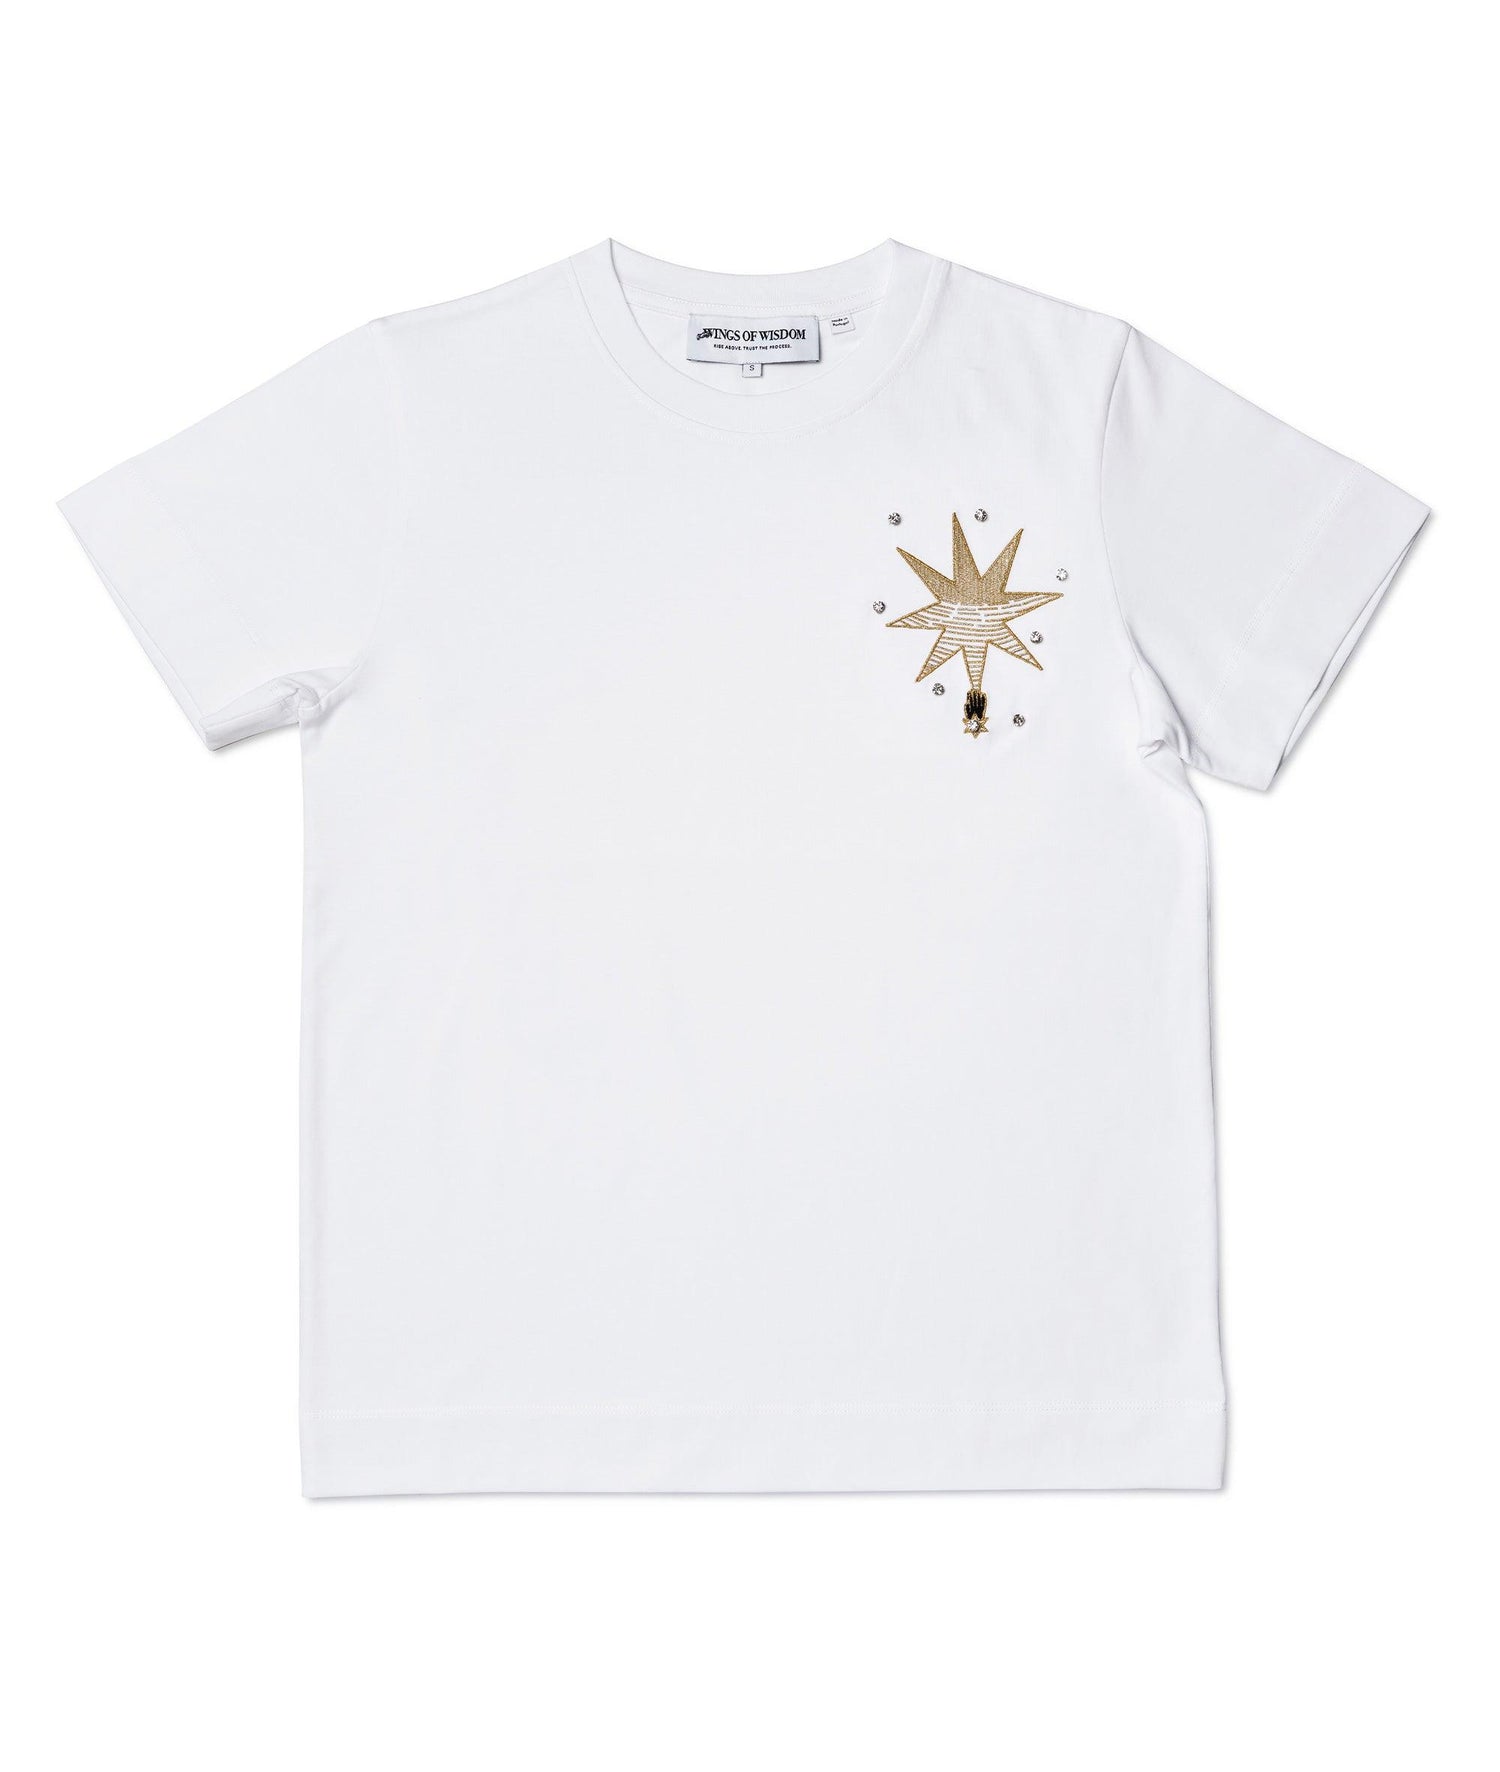 'Hand Me A Star' White T-Shirt - Wing of Wisdom